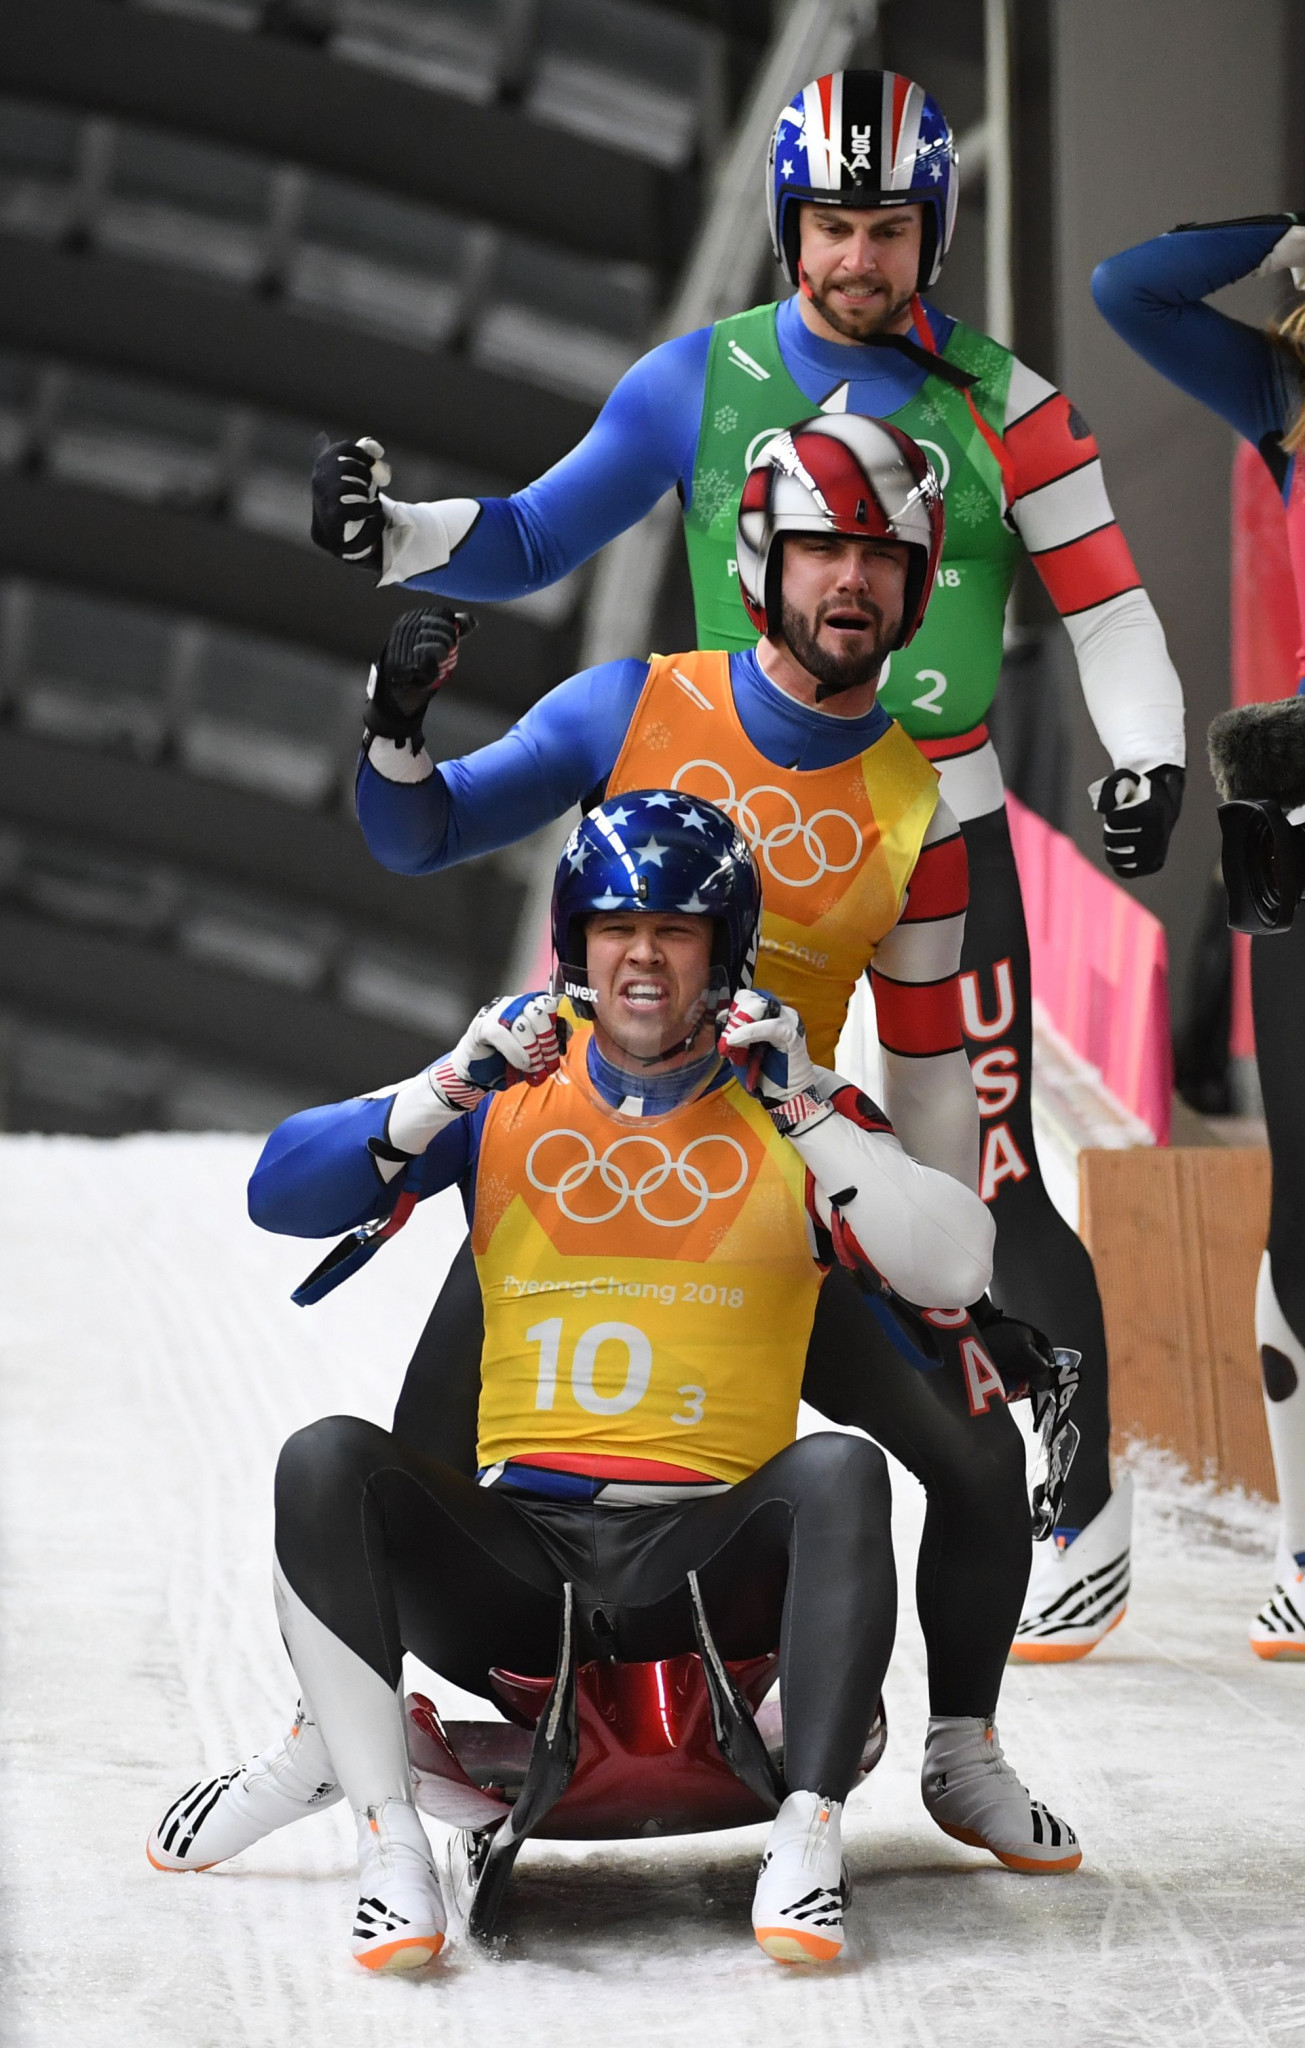 Matthew Mortensen, bottom, Jayson Terdiman, centre and singles luge athlete Chris Mazdzer pictured after competing in the team relay competition during the Pyeongchang 2018 Winter Olympics ©Getty Images  